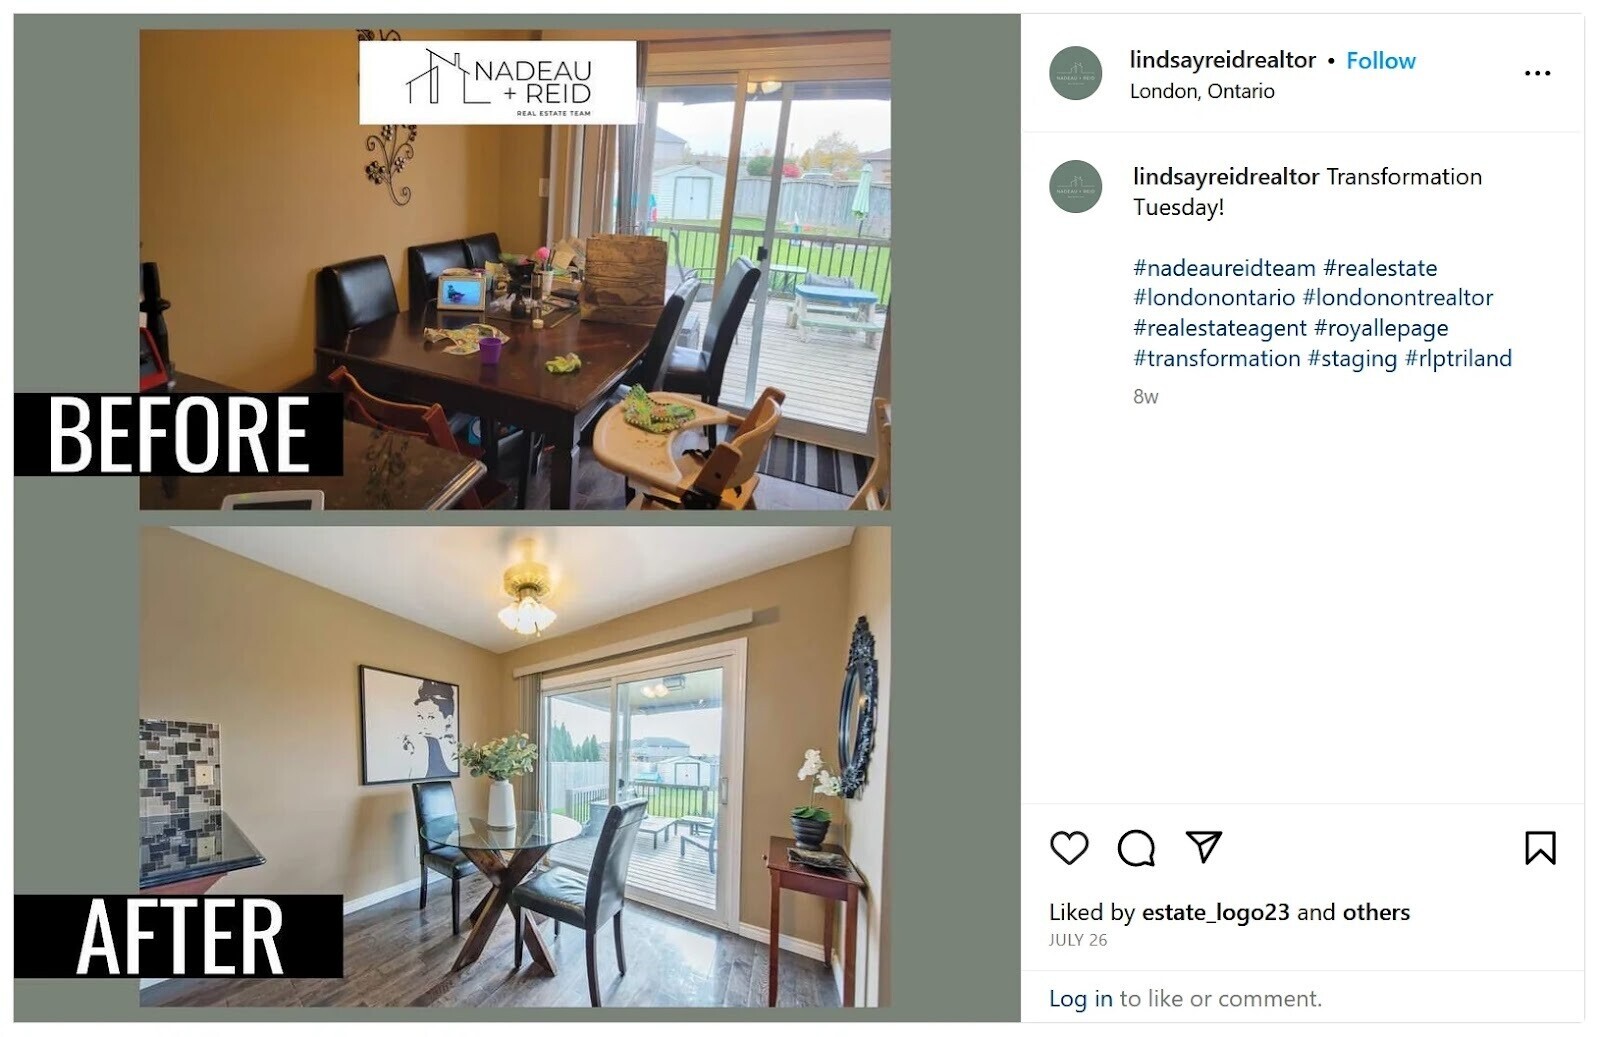 An Instagram post showing before and after images of a property